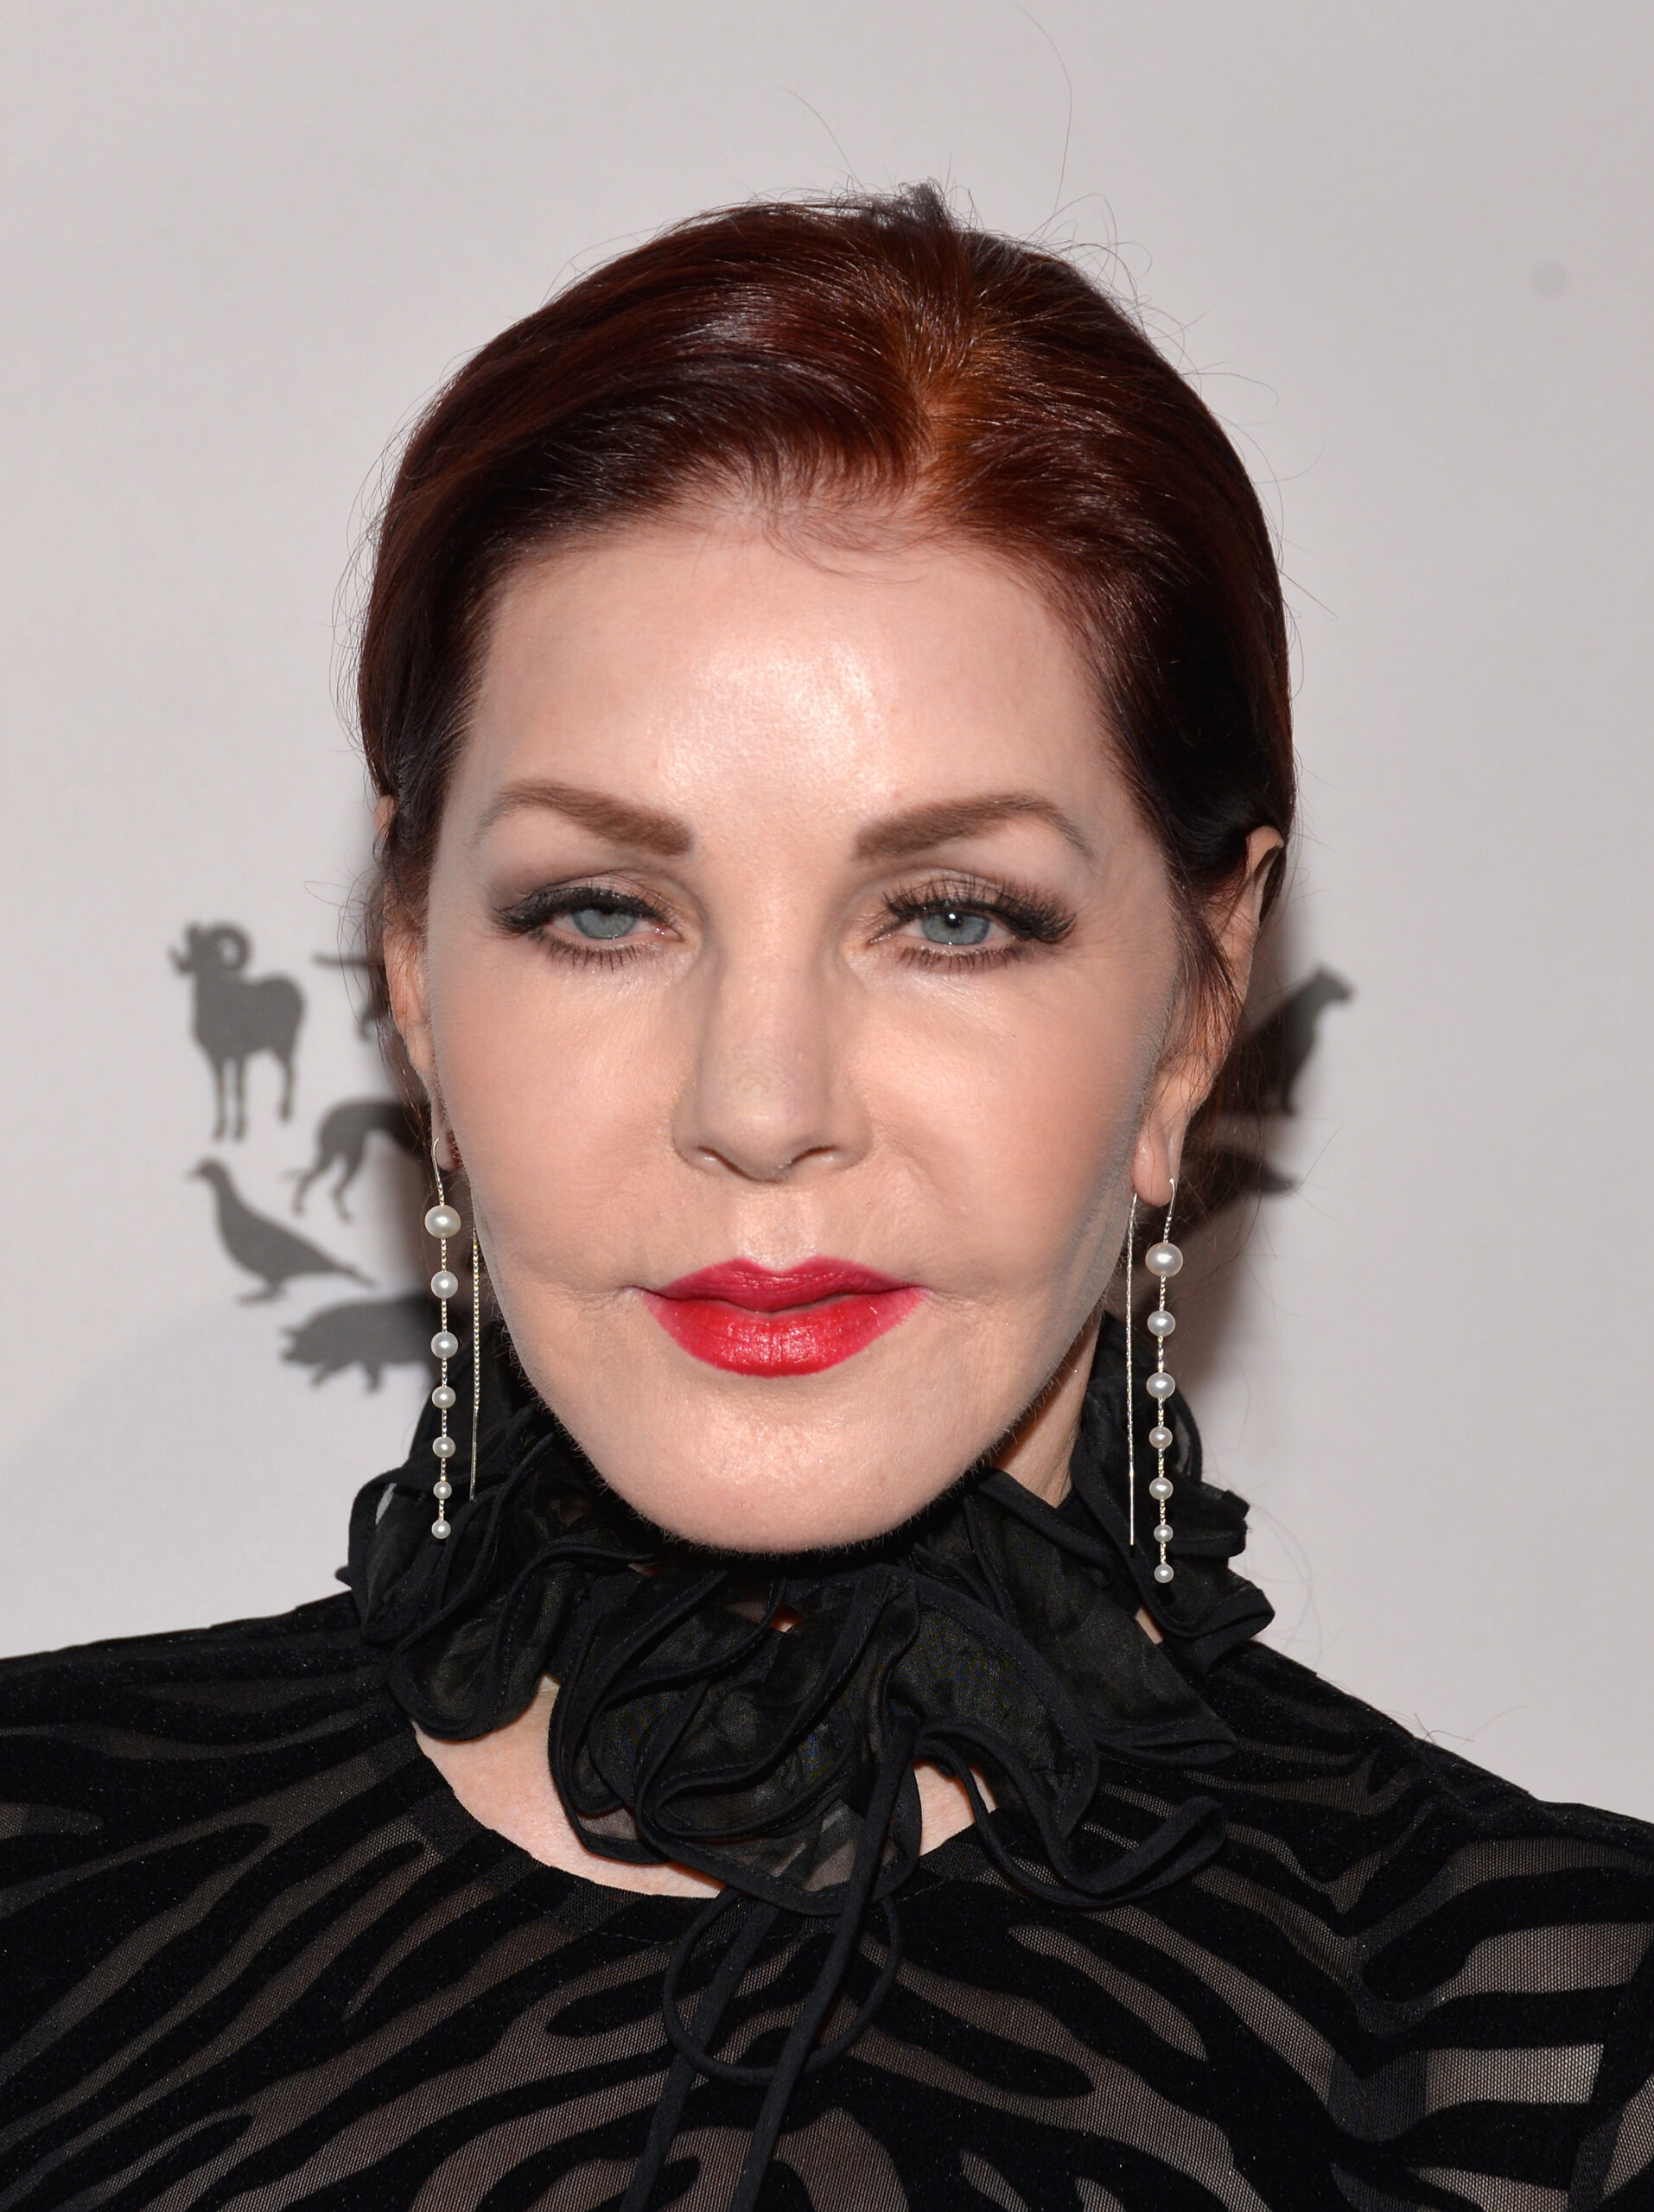 Priscilla Presley at the The Humane Society Of The United States in 2016 | Source: Getty Images